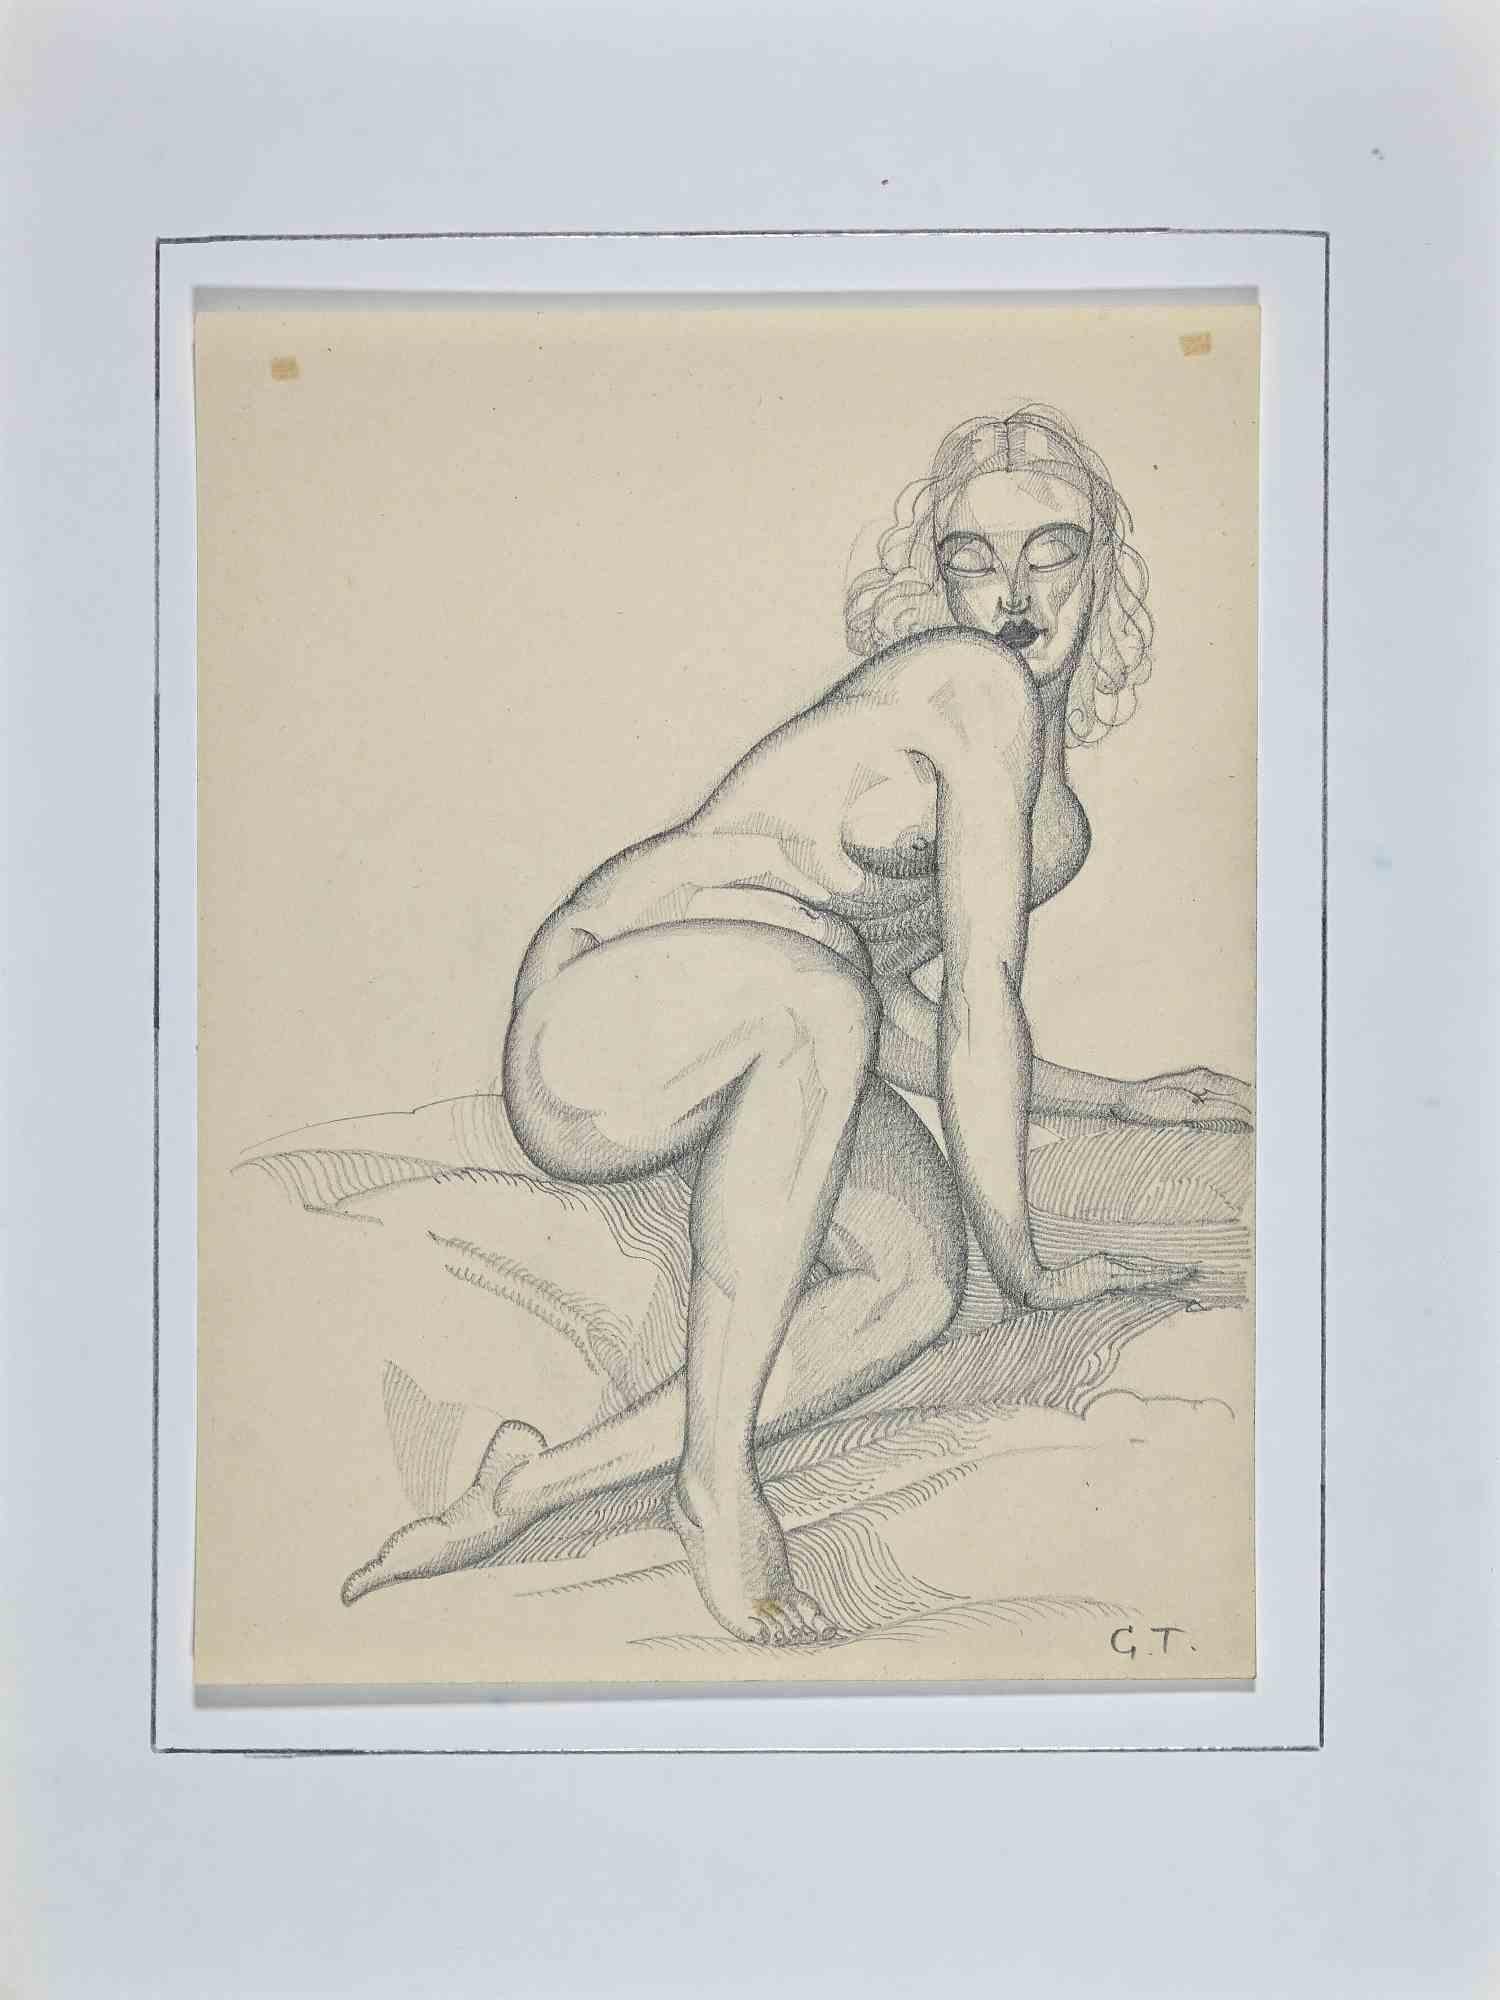 Reclined Nude  - Original Pencil Drawing by George-Henri Tribout - 1950s - Modern Art by Georges-Henri Tribout